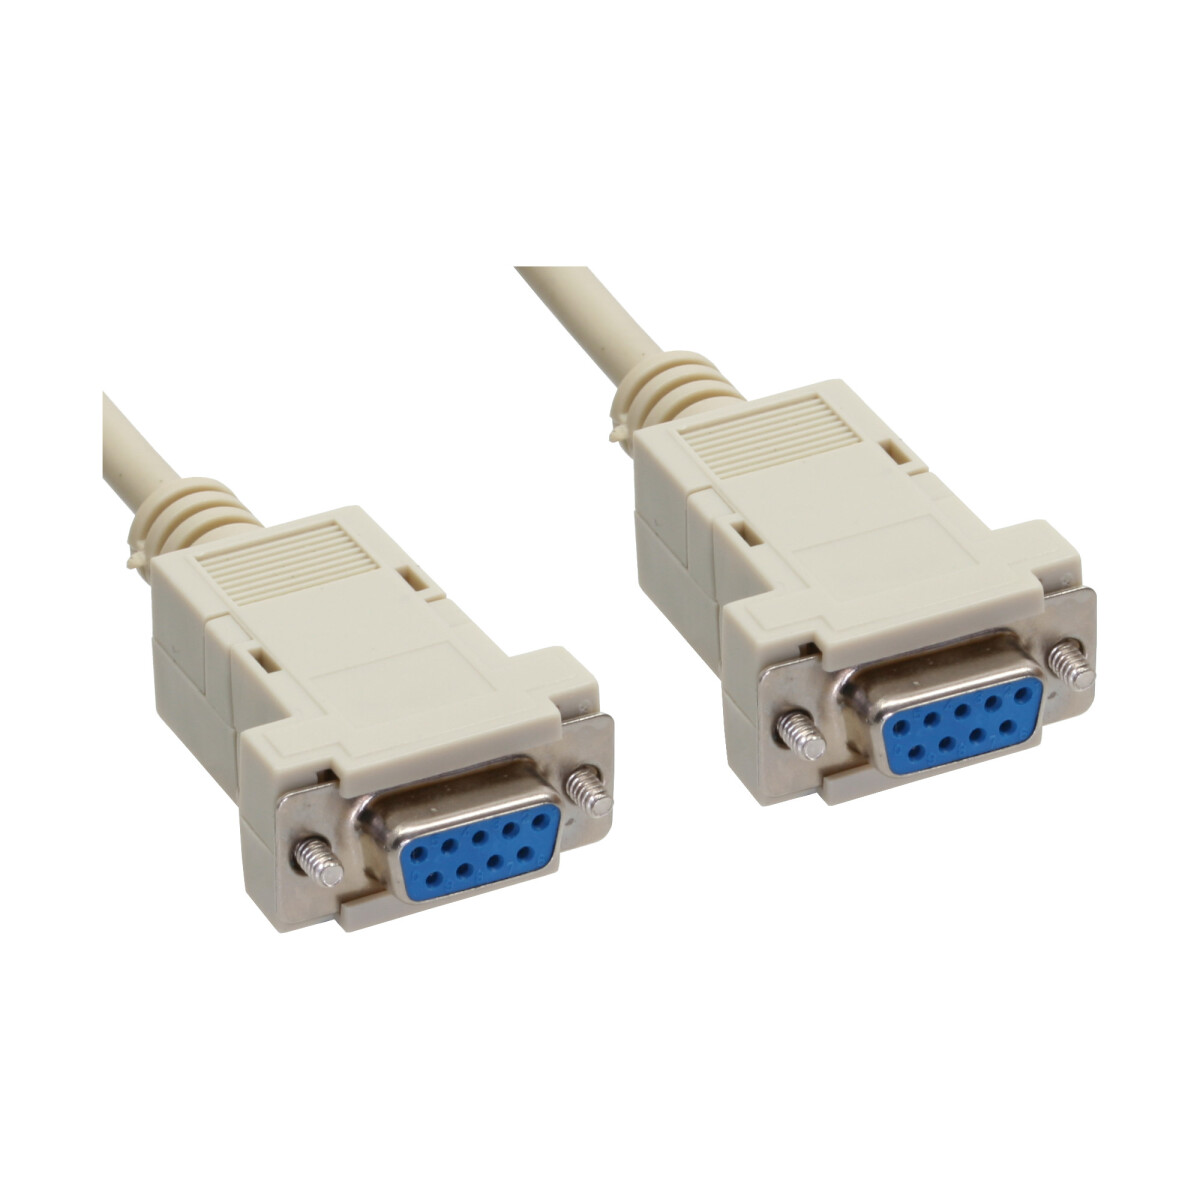 InLine® null modem cable DB9 Pin female / female,...